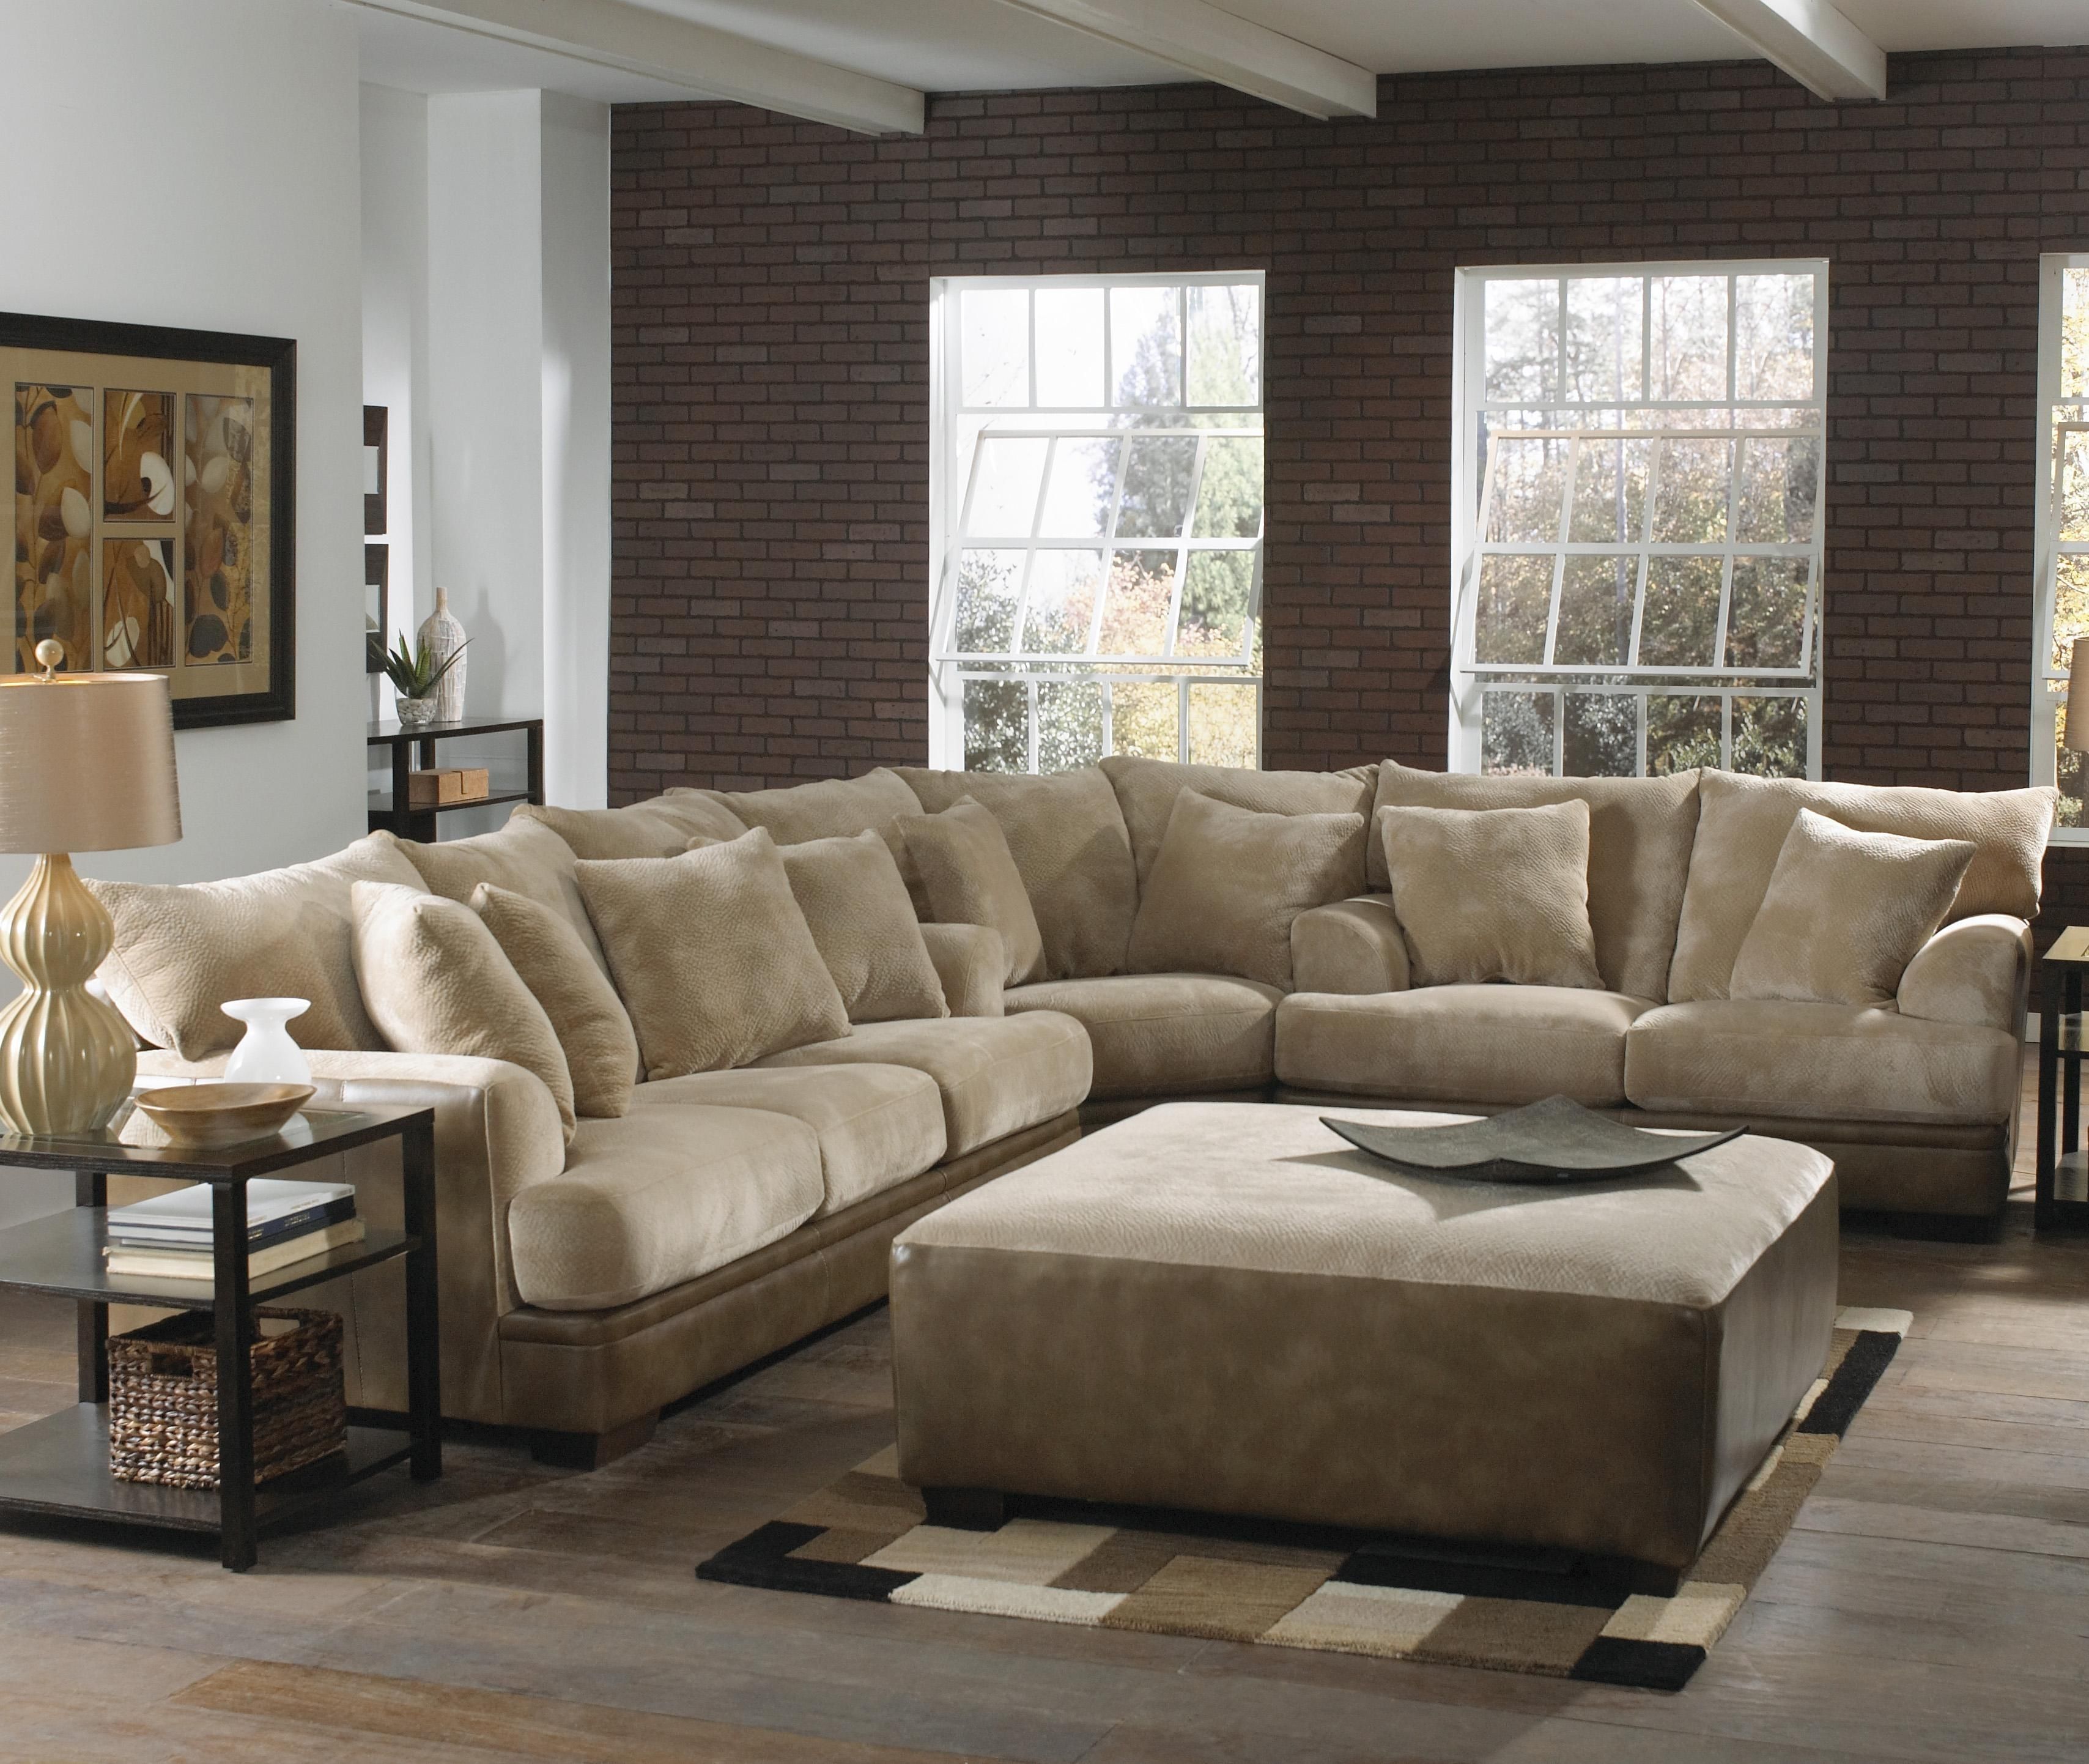 Barkley Large L Shaped Sectional Sofa With Right Side Loveseat Regarding Sectional Couches With Large Ottoman (View 9 of 15)